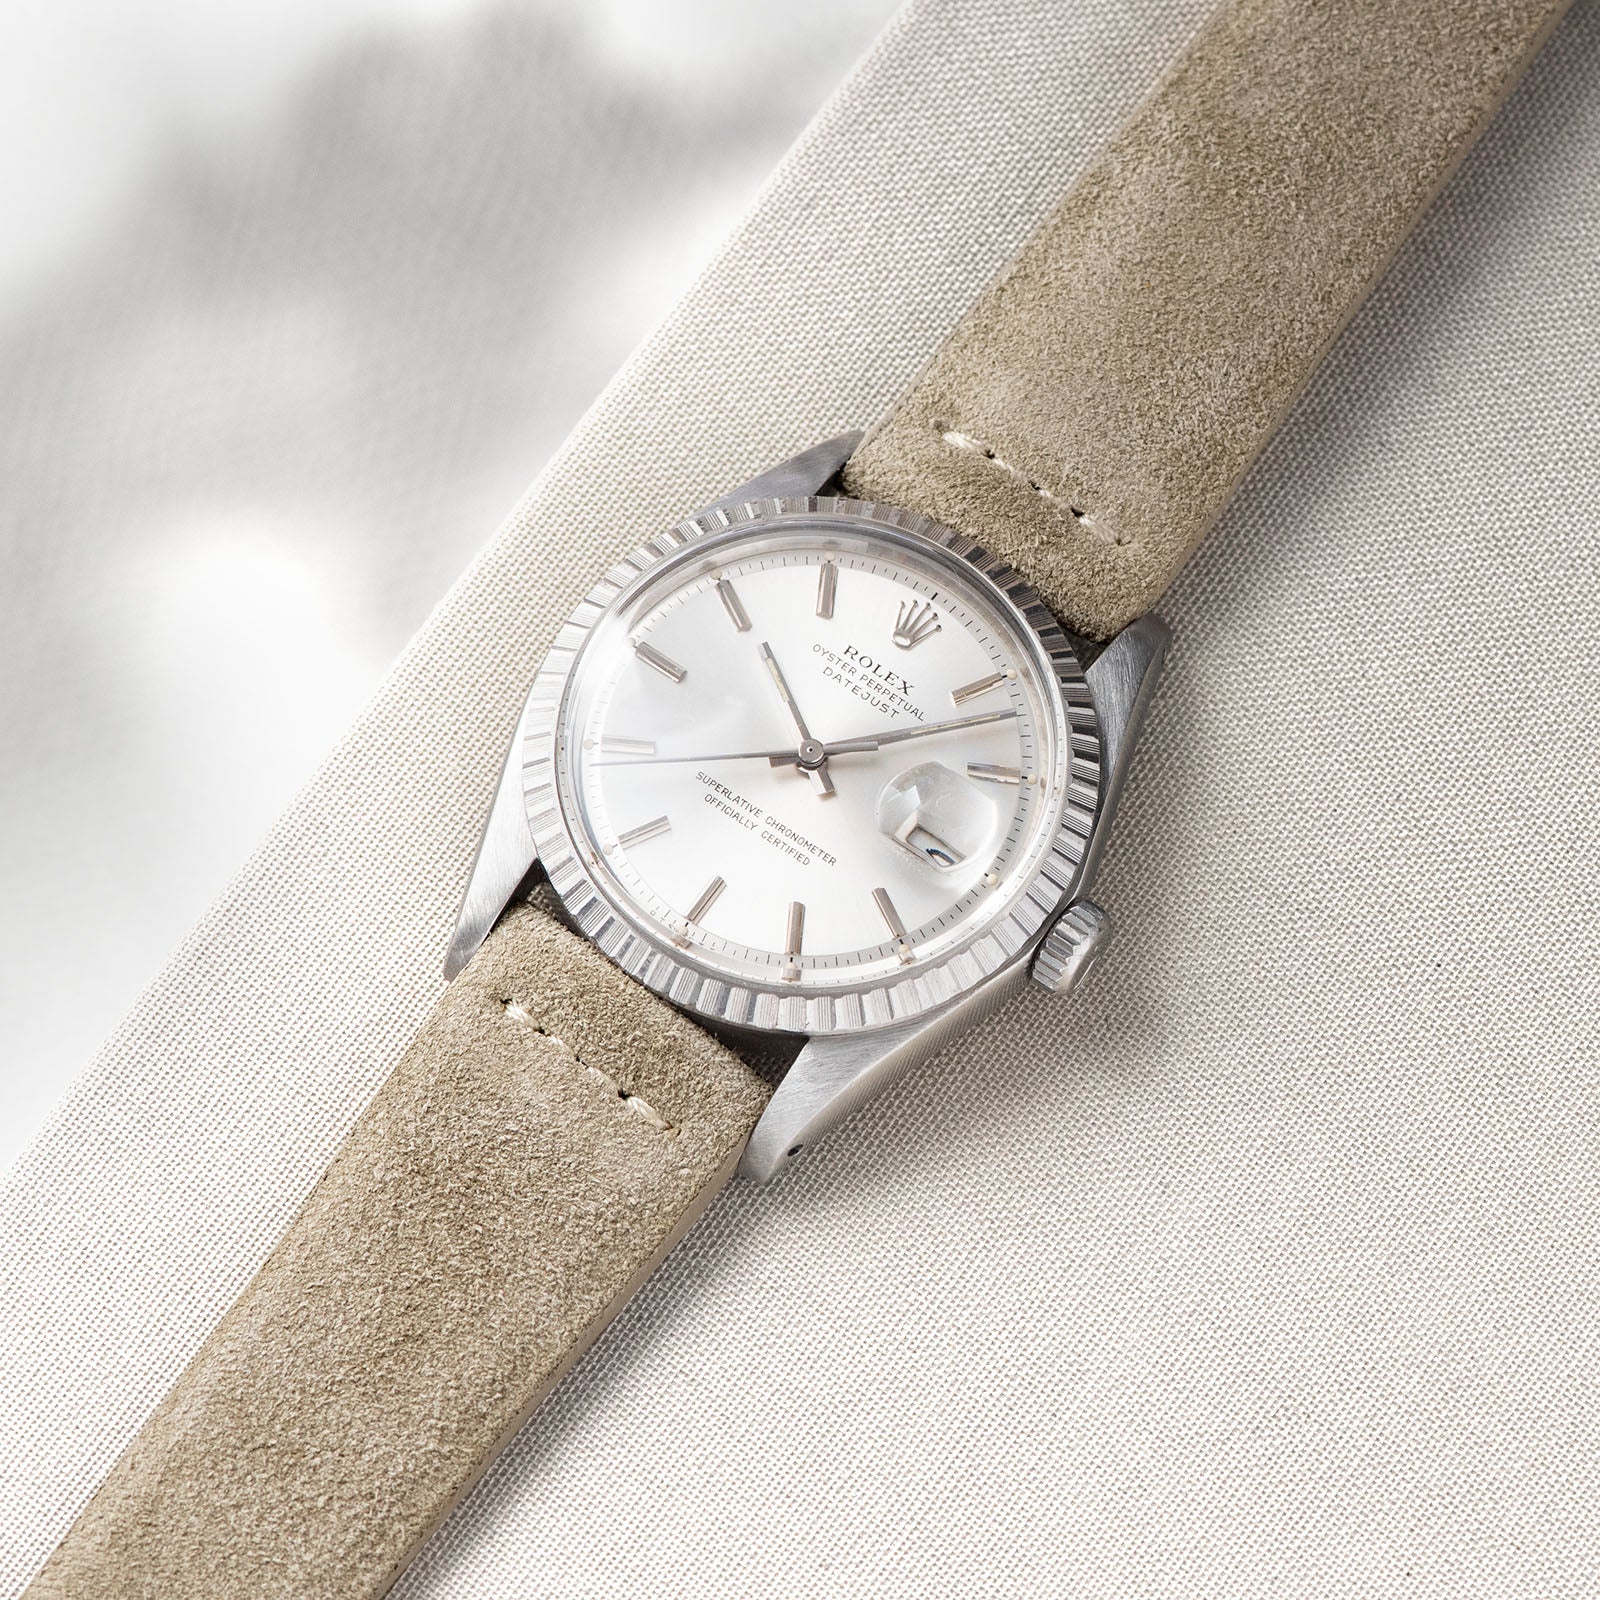 Bulang and Sons_Strap Favorites_Rolex Datejust Silverdial 1601 1603 1600 1630_ Concrete Grey Suede Leather Watch Strap